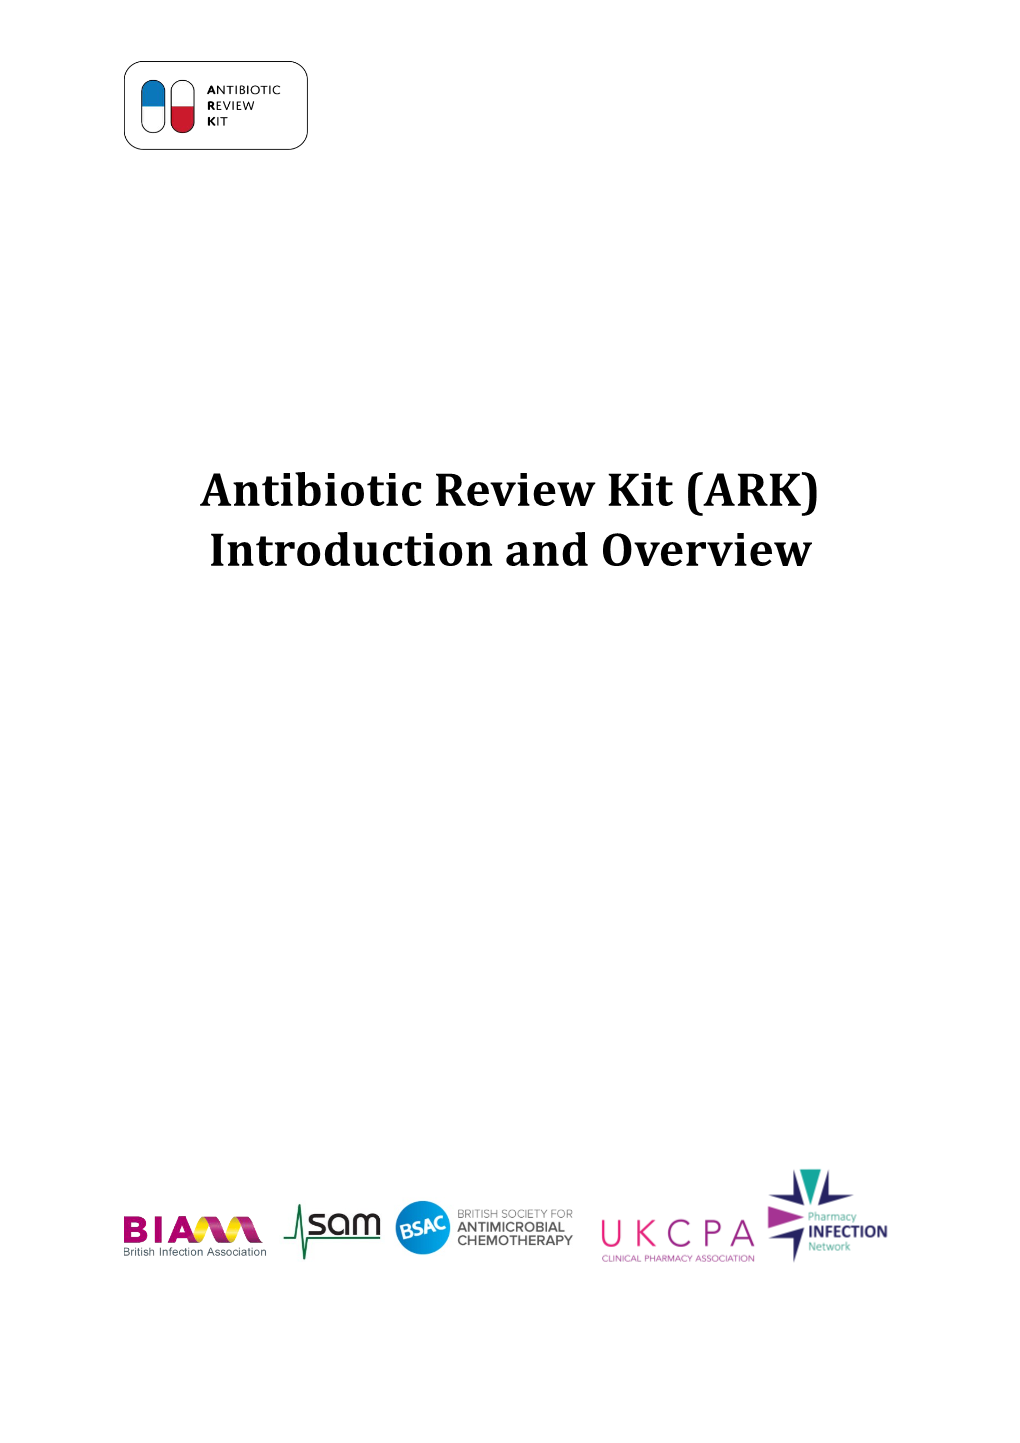 Antibiotic Review Kit (ARK) Introduction and Overview